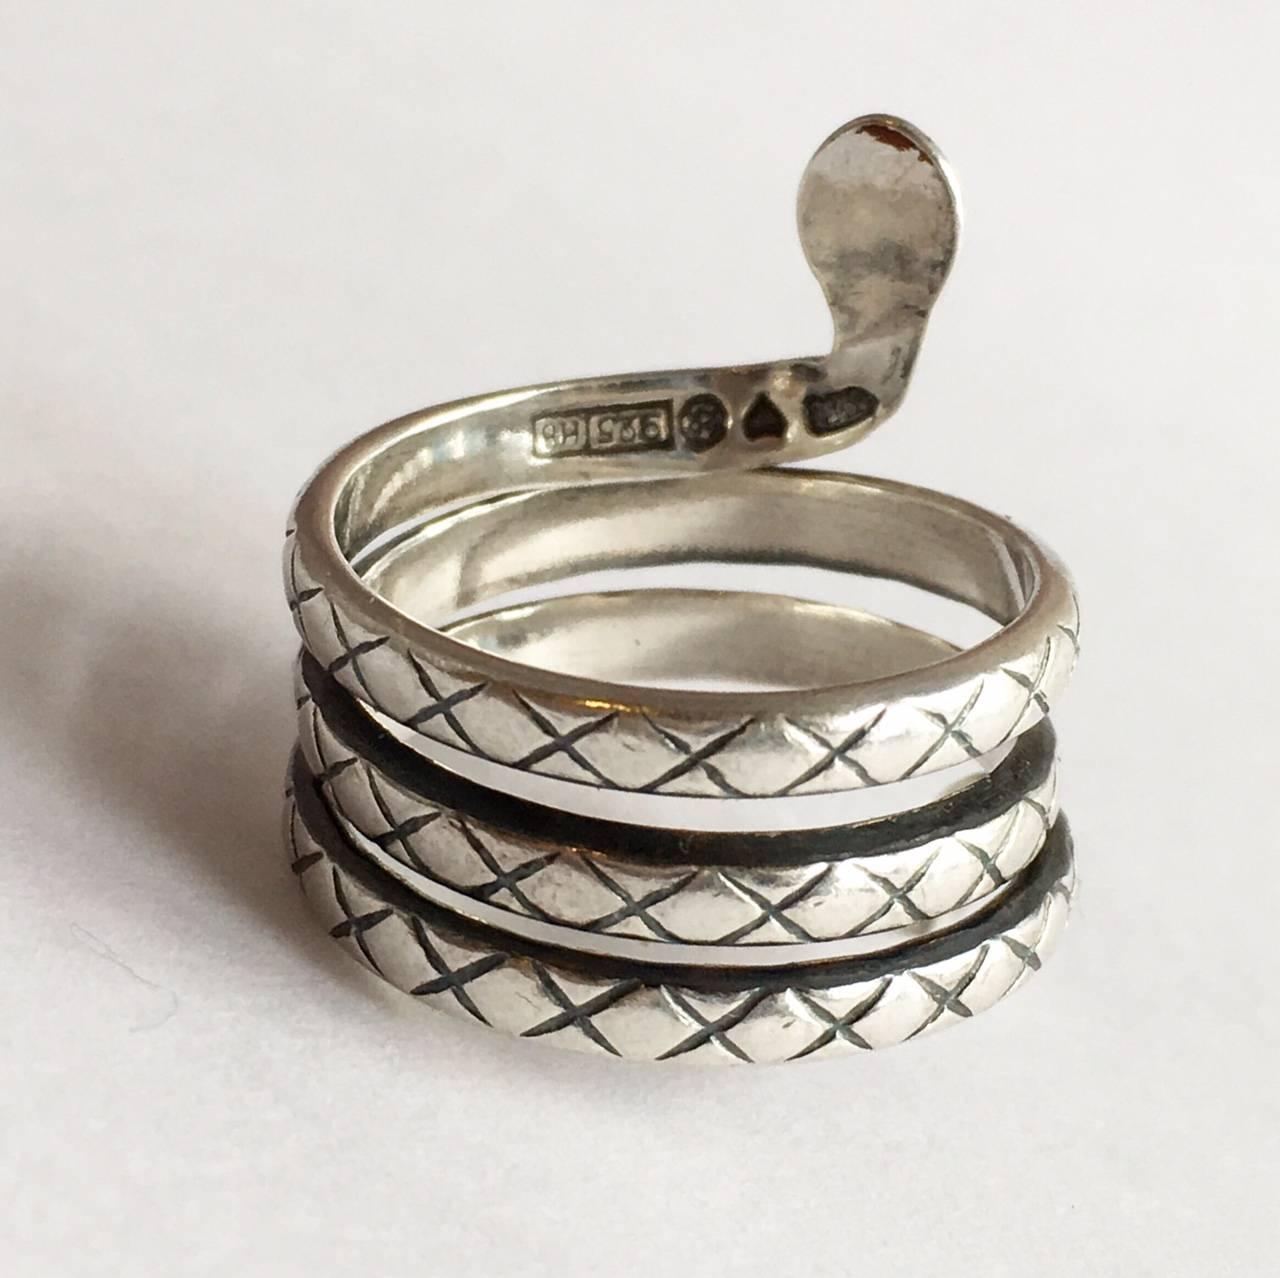 Designed by Finnish designer Kalevala Koru, this sterling silver snake ring coils around the finger appealingly. The crisscross etching and little eyes are nicely done, giving the little fellow an affable air.  

Snakes are revered in many cultures